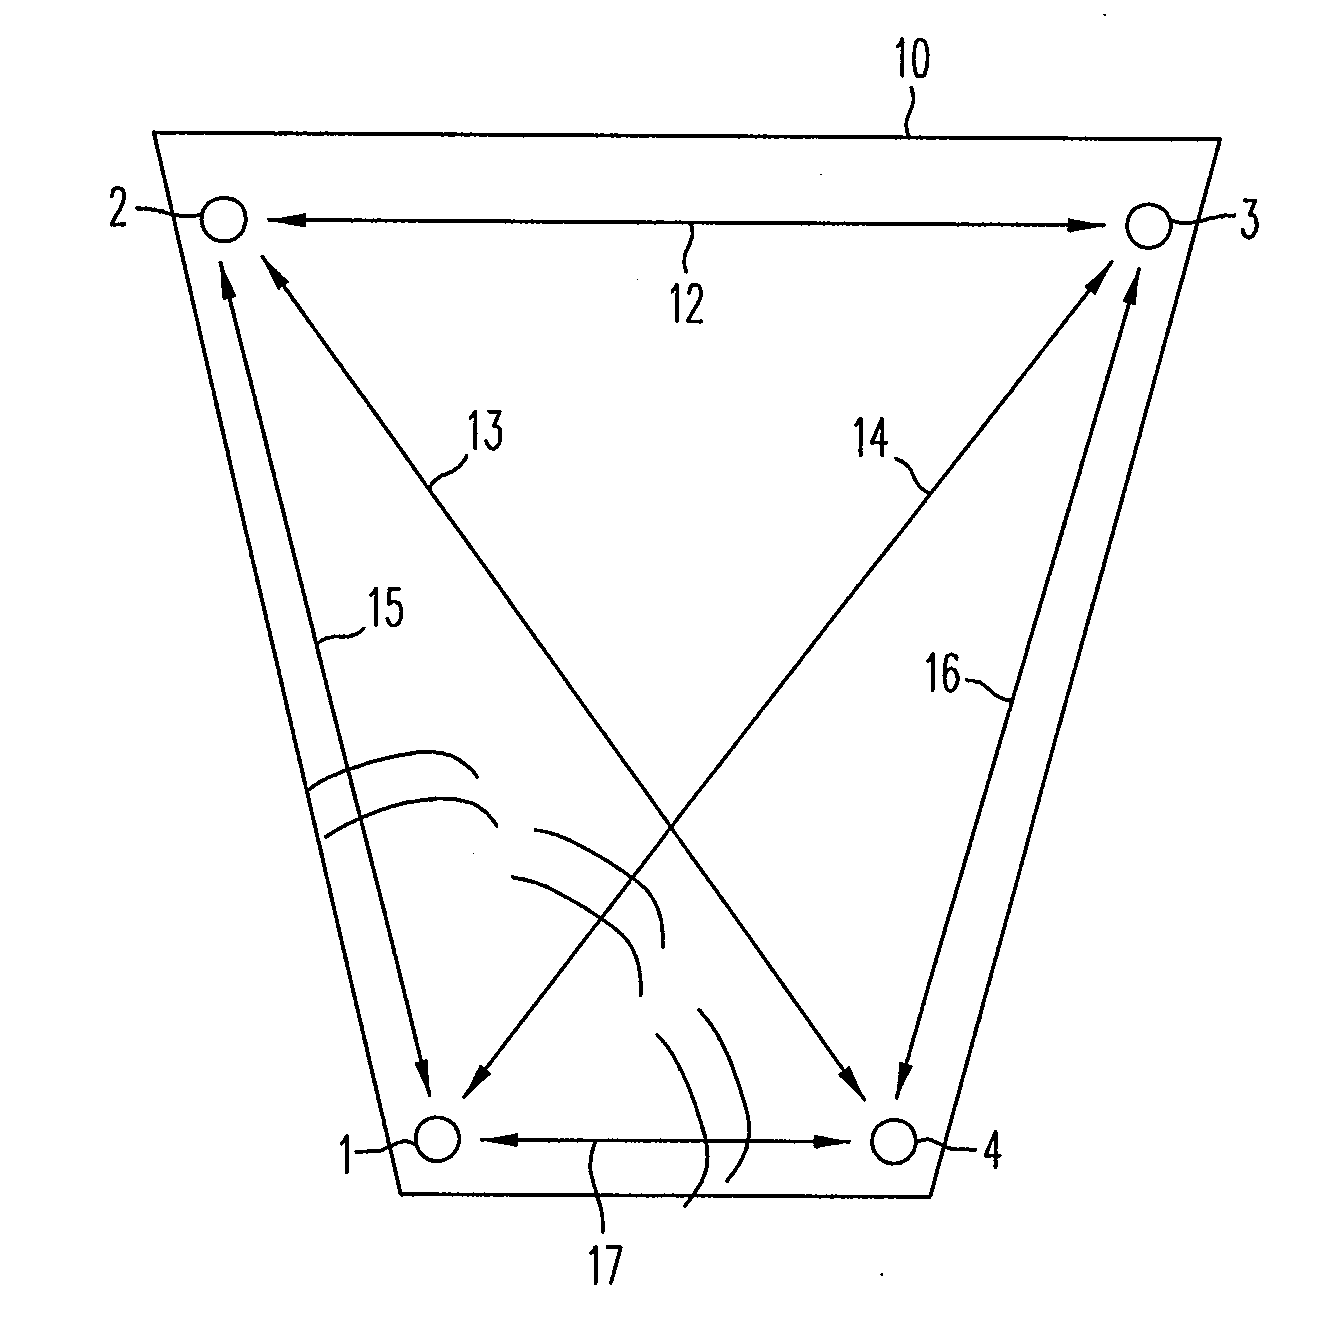 Method and apparatus for detecting damage in armor structures